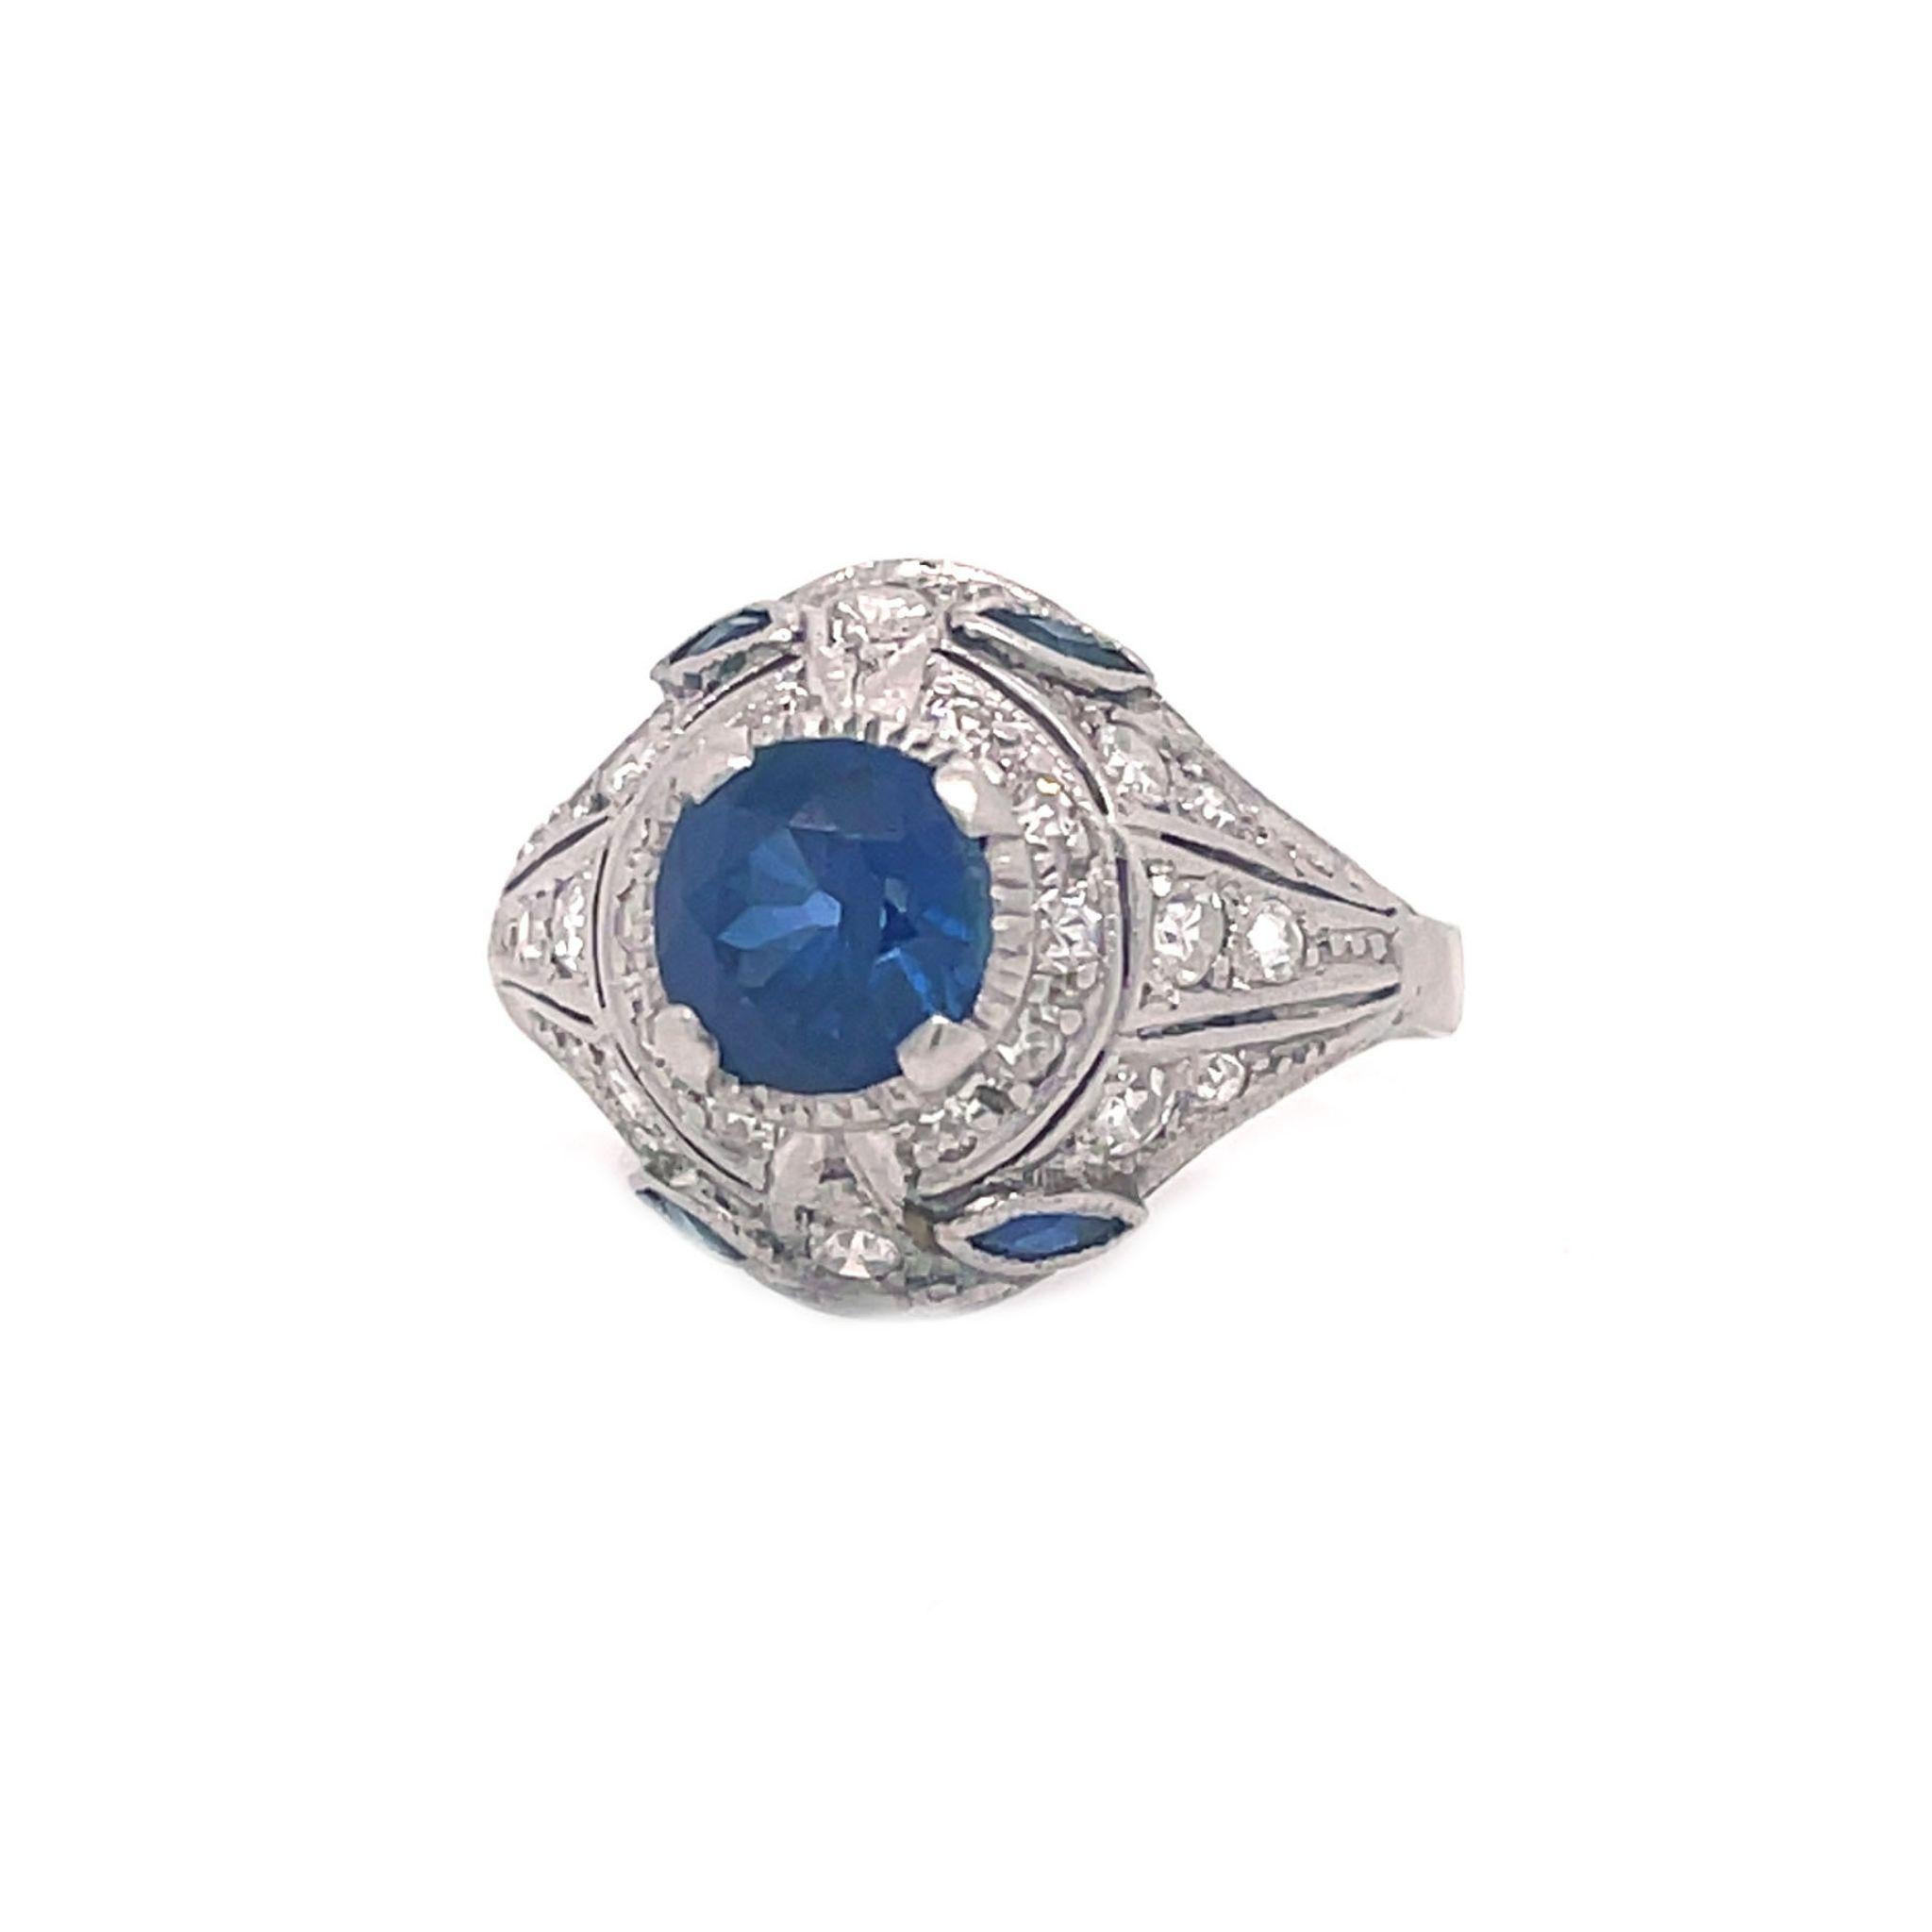 This is an absolutely breathtaking Art Deco ring set in platinum with bright sparkling diamonds and a rich blue sapphire! The Art Deco influence is clear in the dramatic lines and gorgeous color contrast with this ring. The piercing blue sapphire